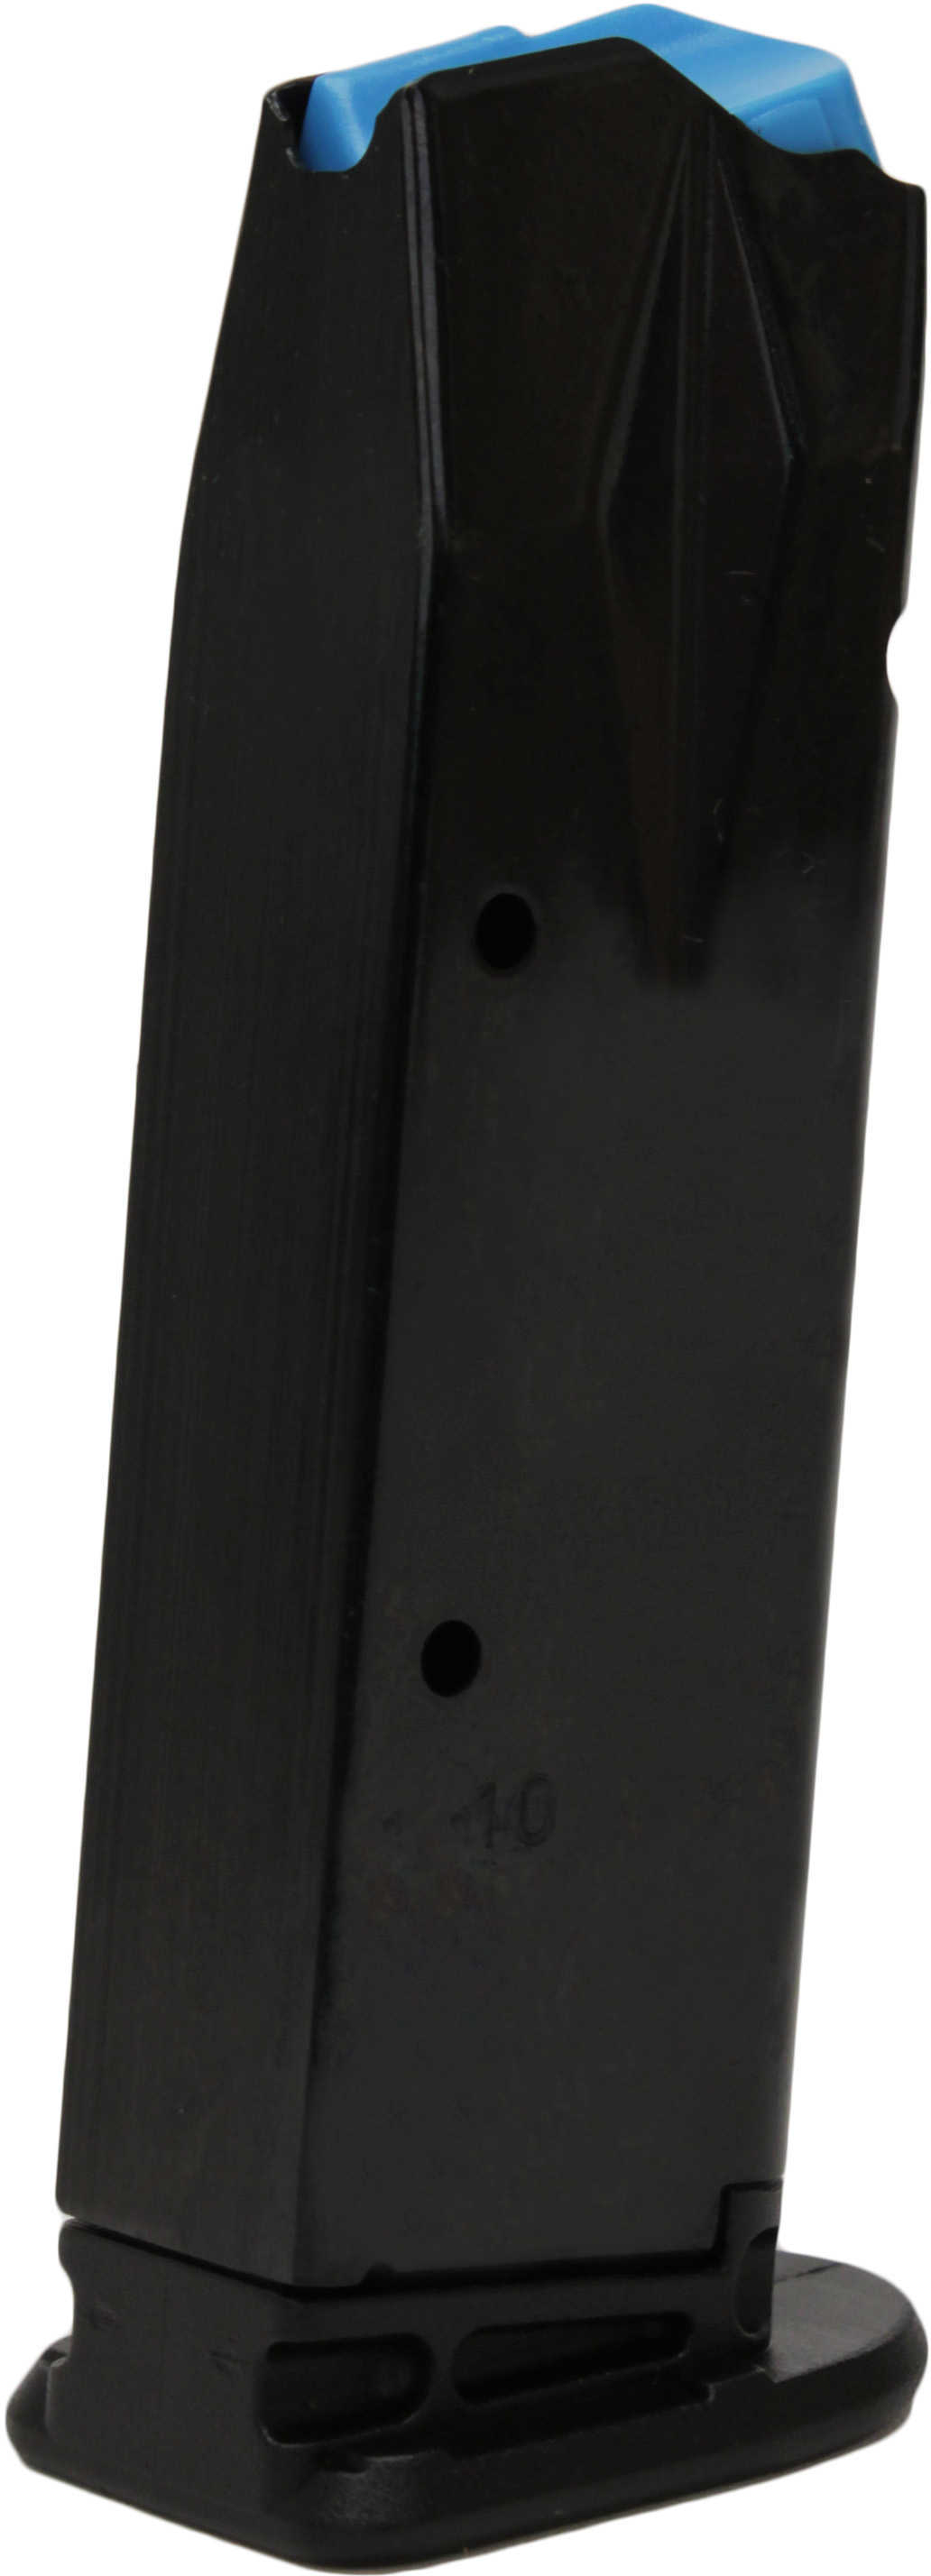 Walther P99 .40 Smith & Wesson Magazine 10 Round 2796503